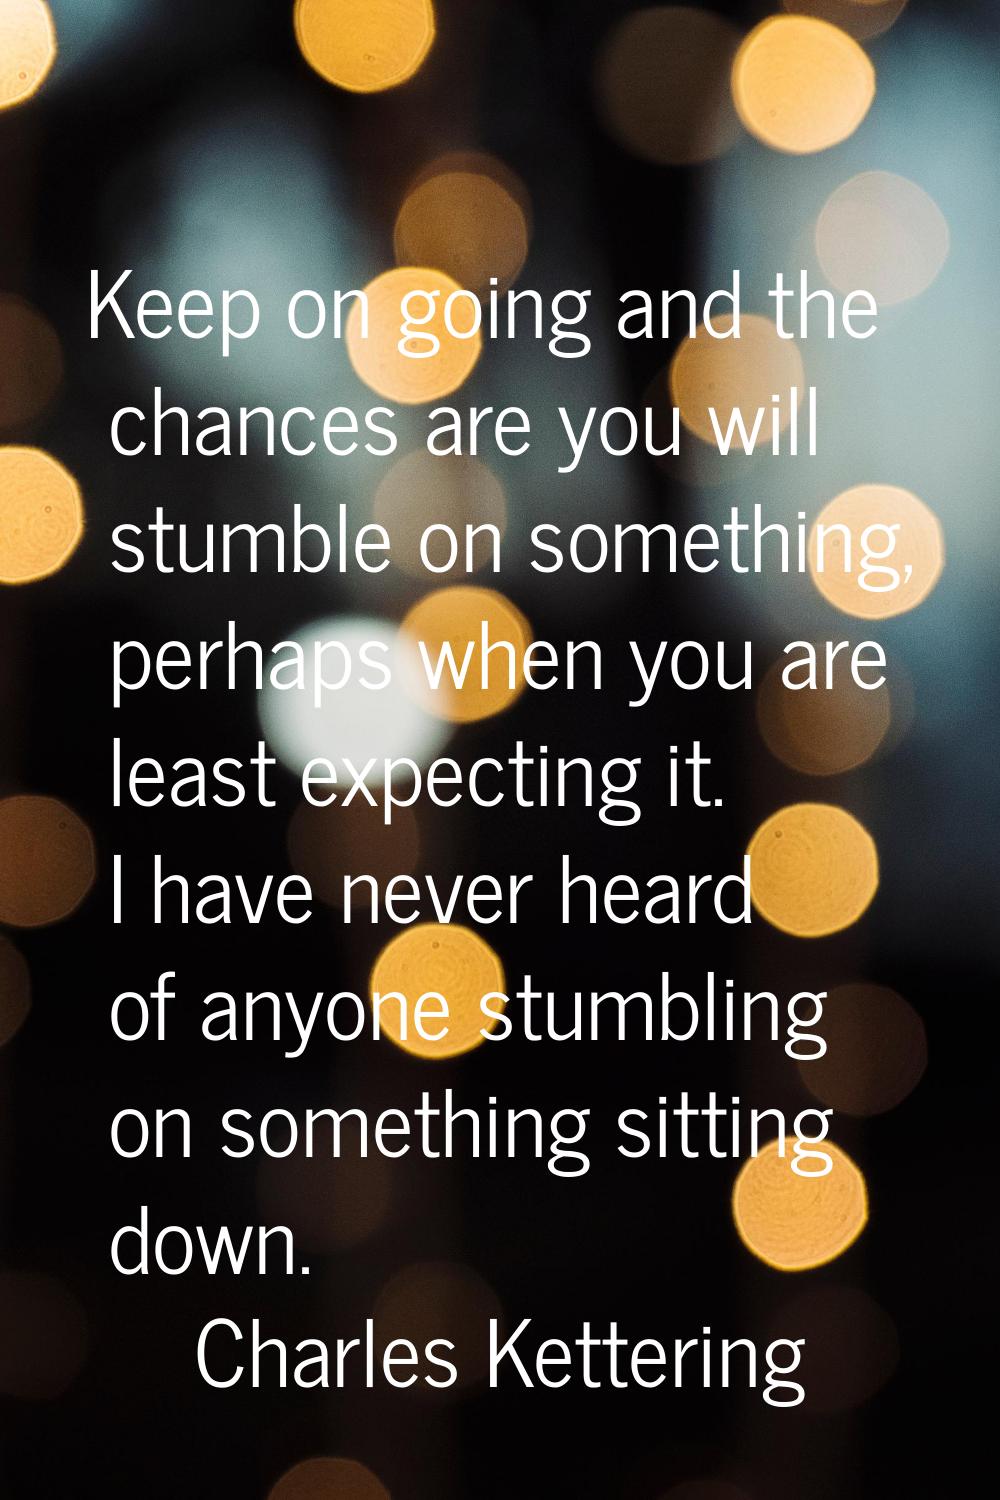 Keep on going and the chances are you will stumble on something, perhaps when you are least expecti